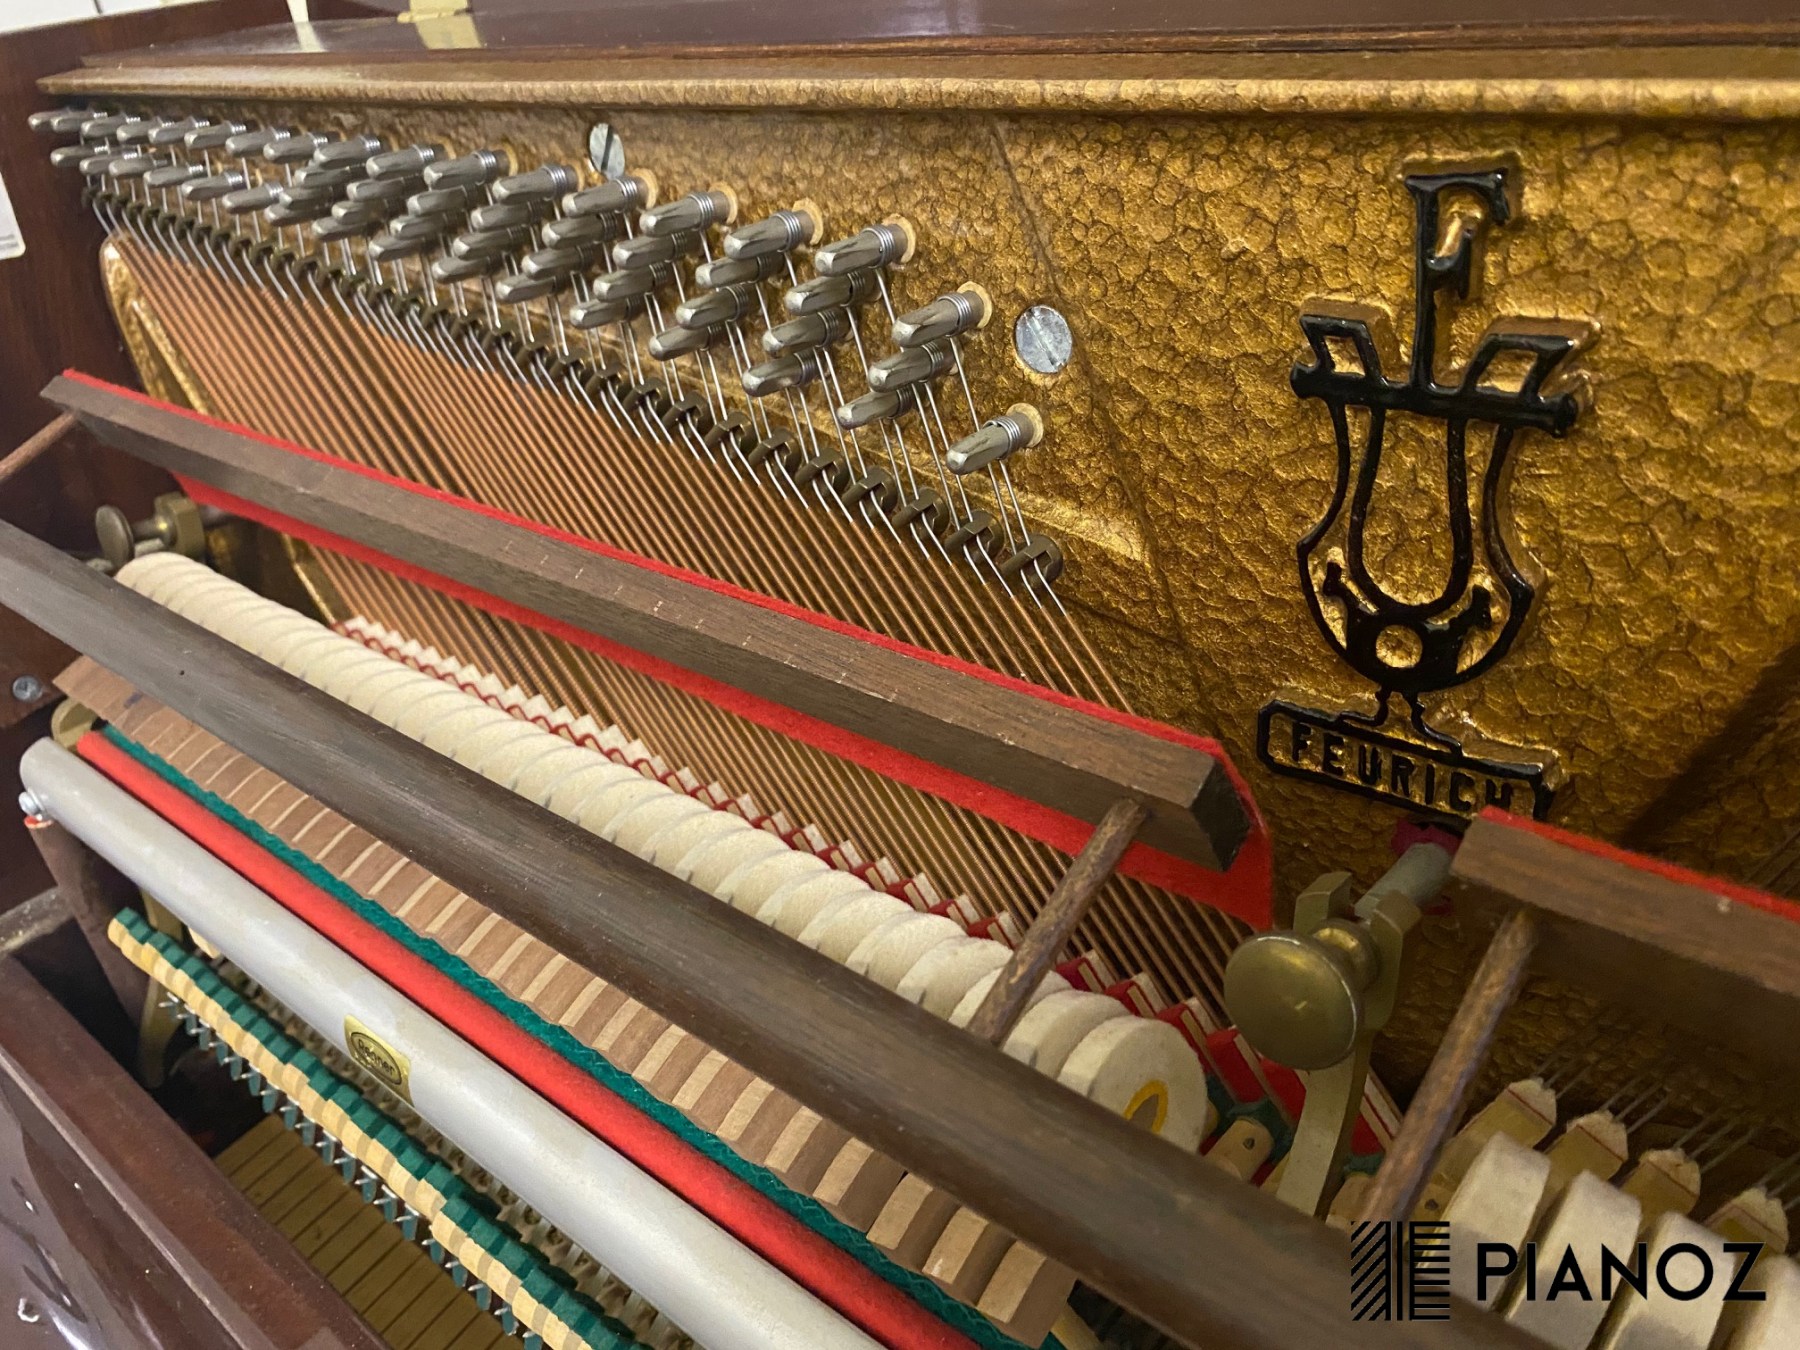 Feurich W Hoffmann Upright Piano piano for sale in UK